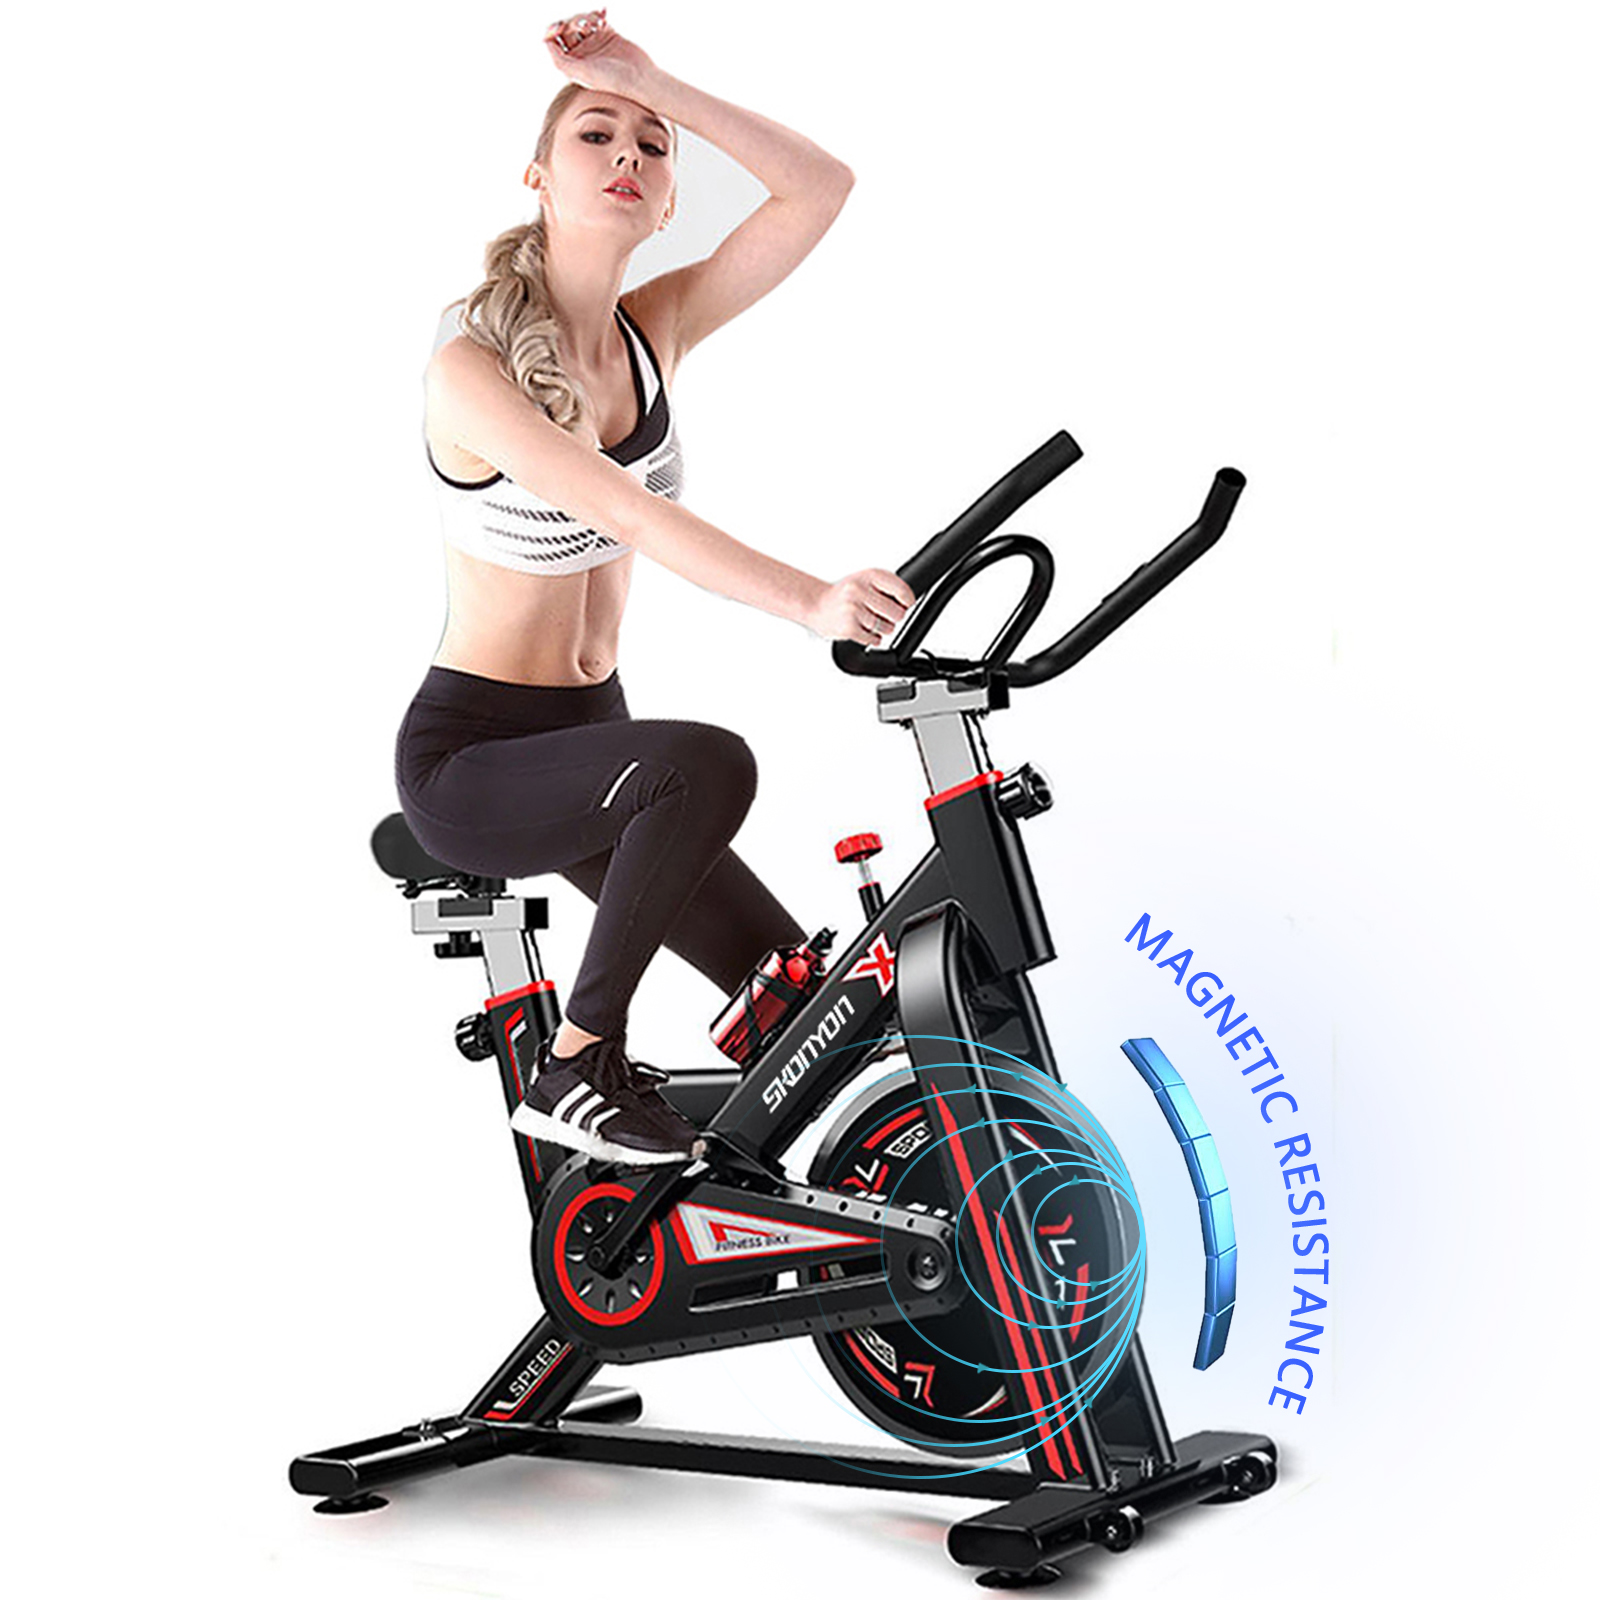 SKONYON Exercise Bike Stationary Indoor Cycling Bike Heavy Duty Flywheel Bicycle for Home Cardio Workout - image 1 of 9